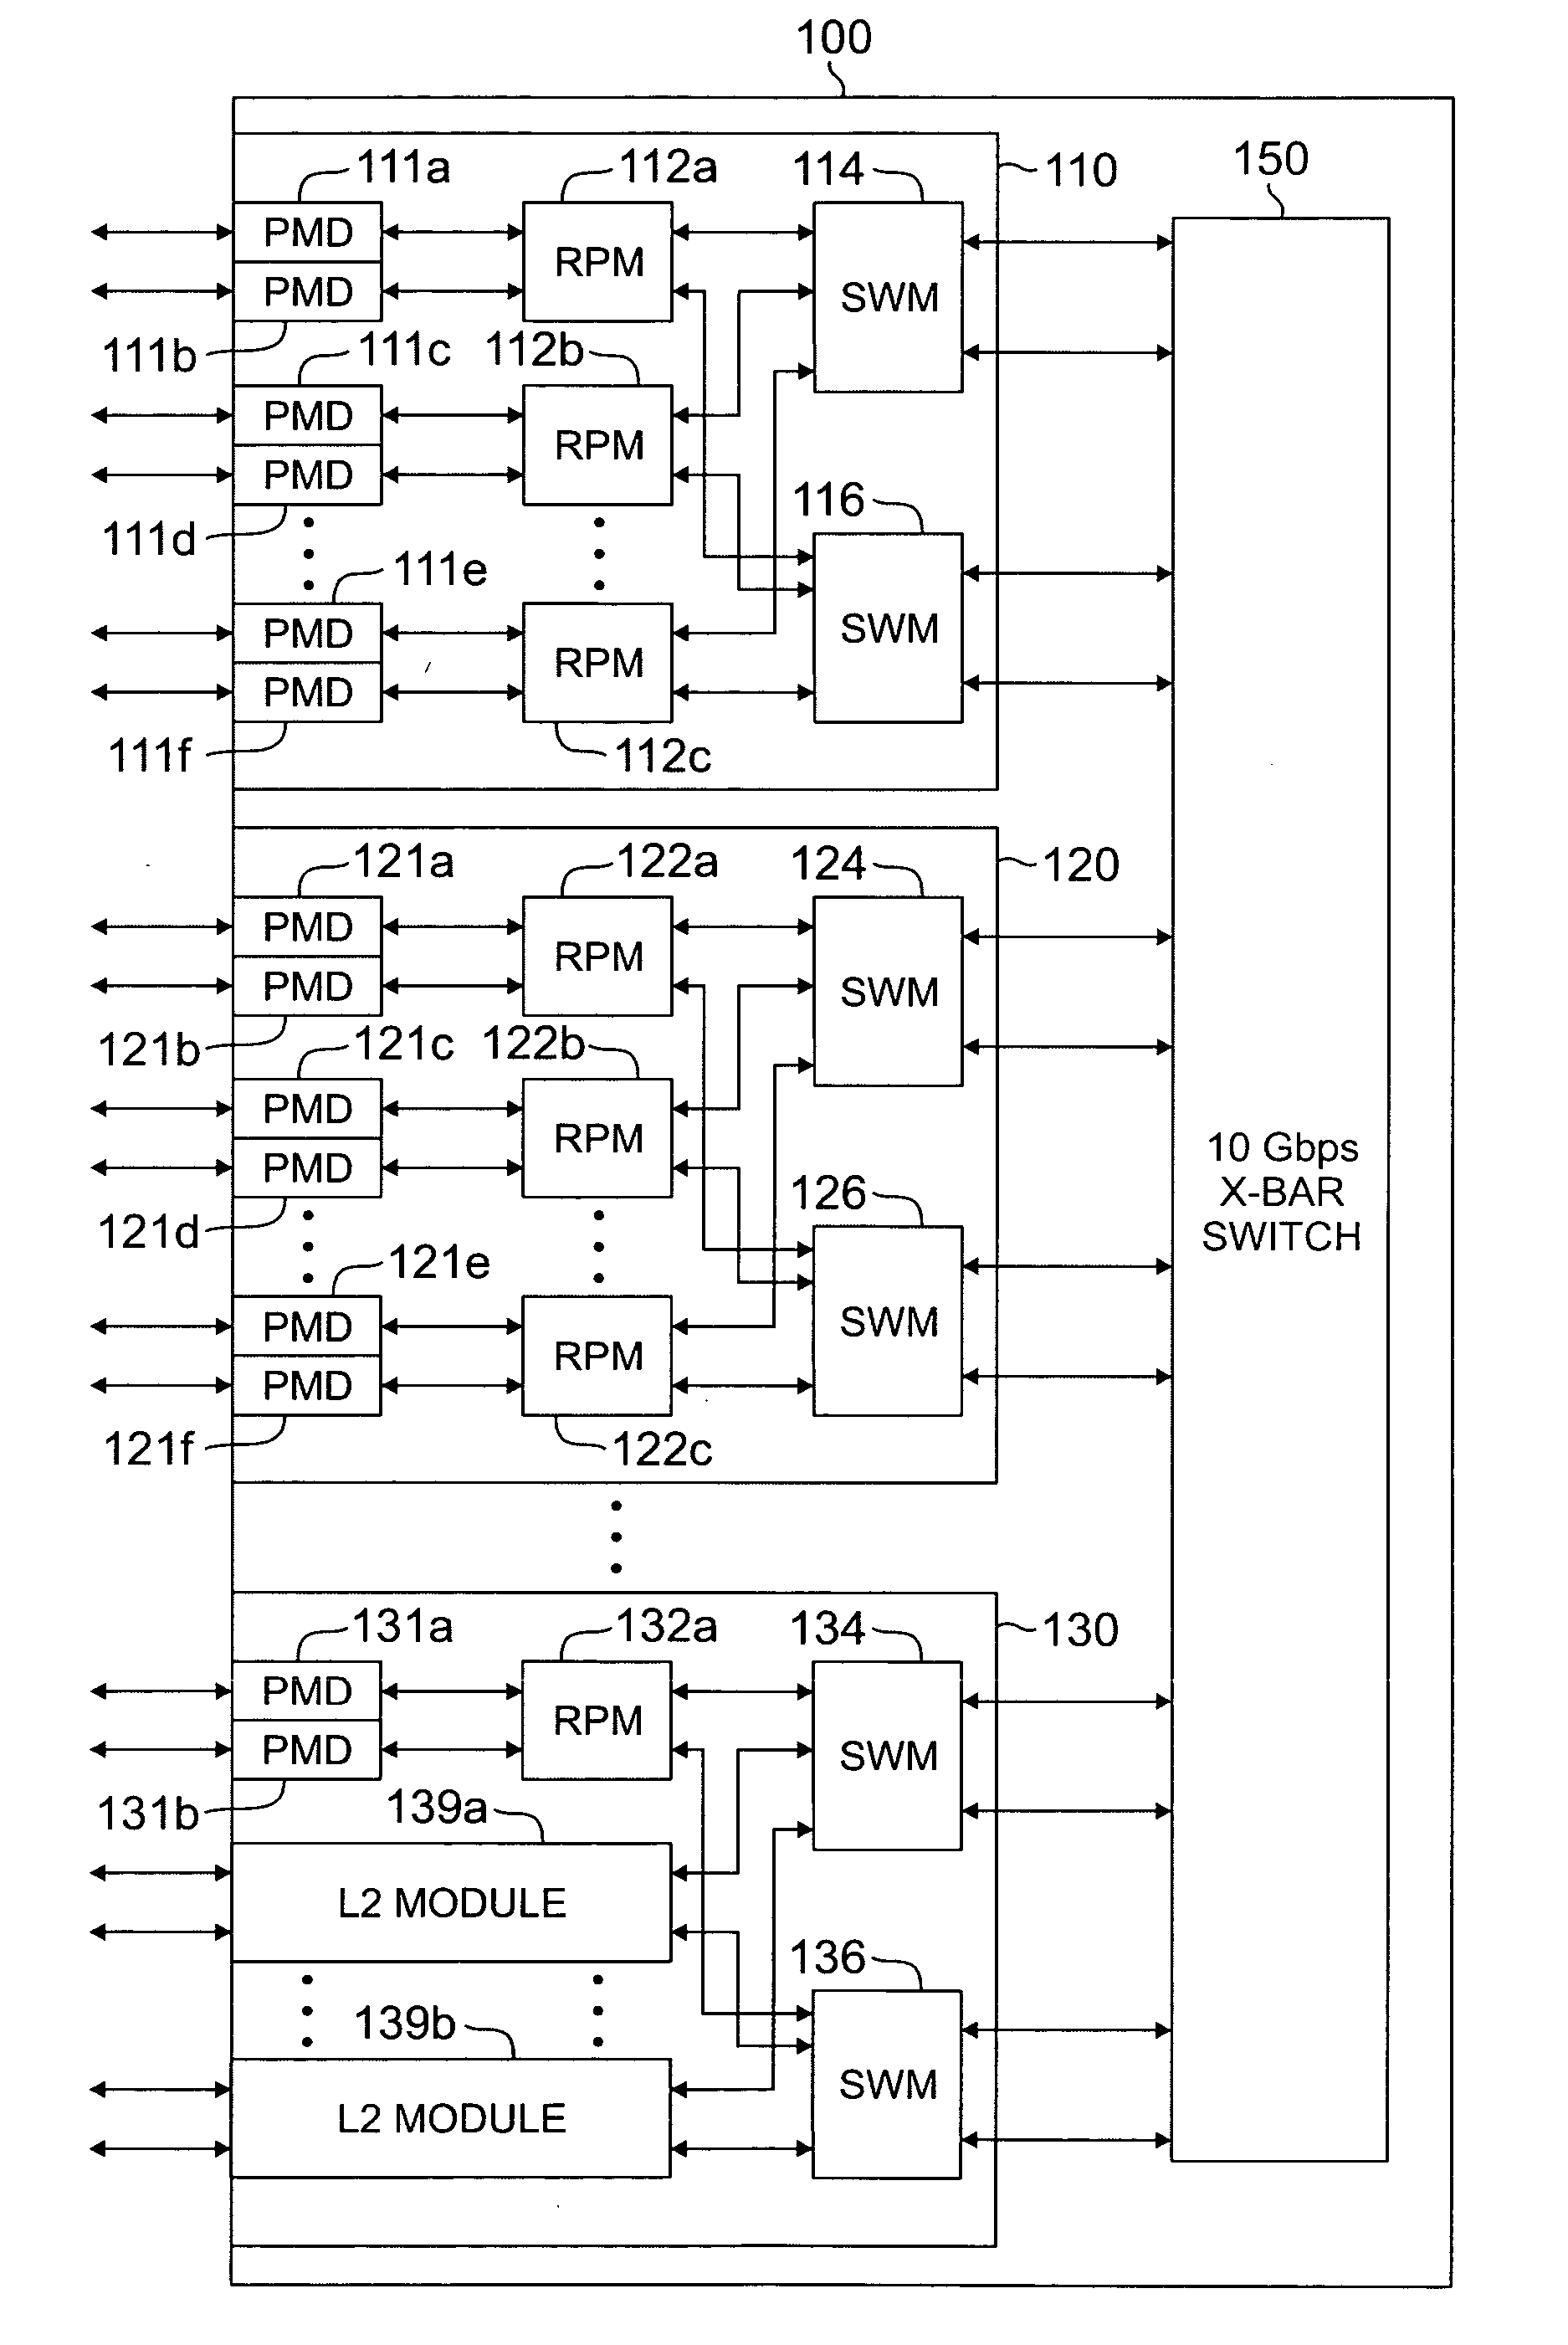 Apparatus and method for maintaining high-speed forwarding tables in a massively parallel router